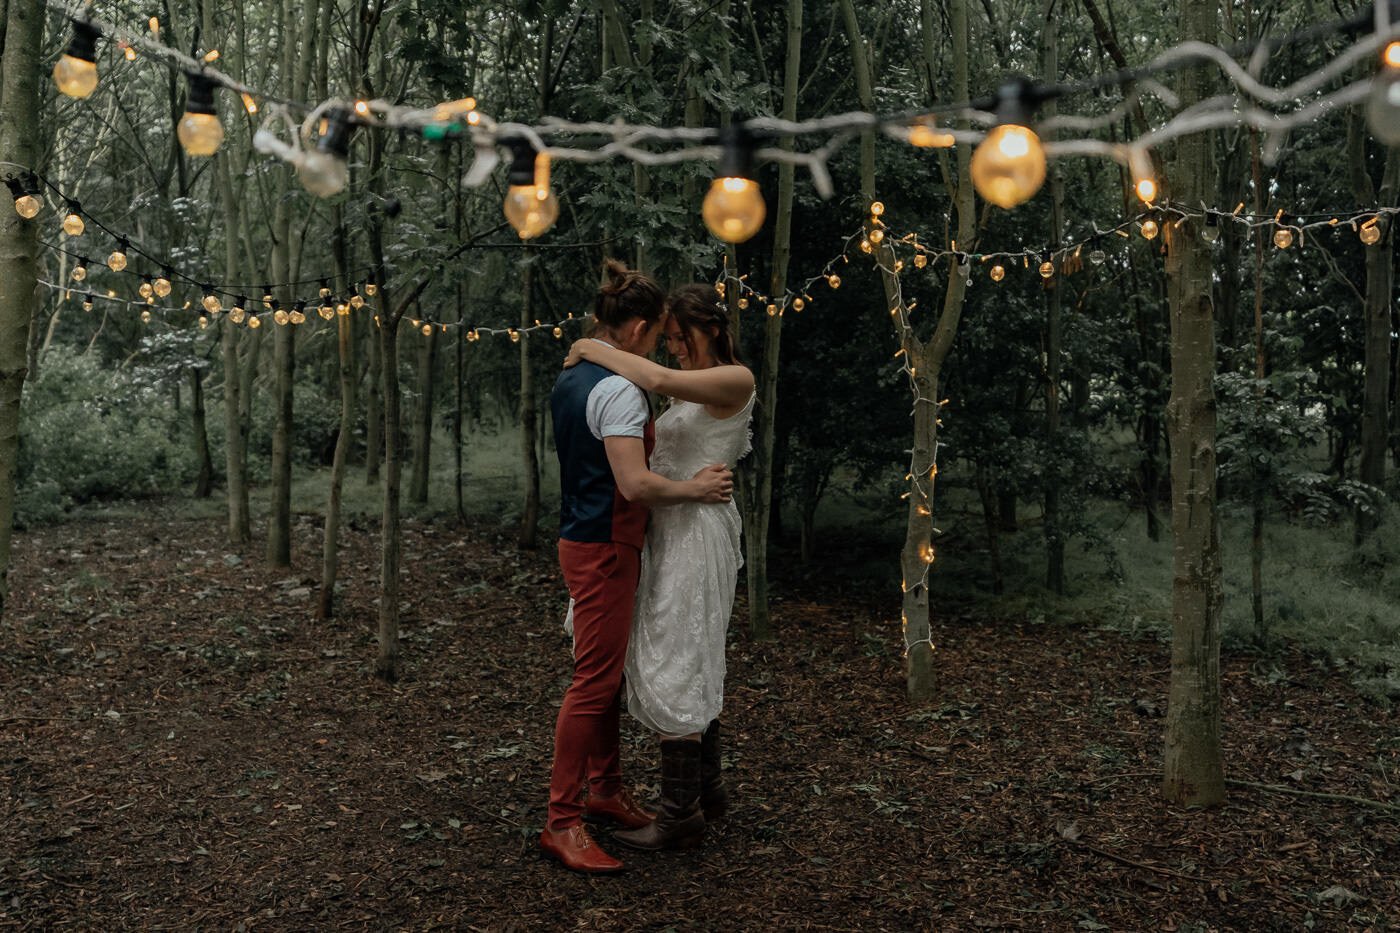 first dance for wedding couple in forest with festoon lighting